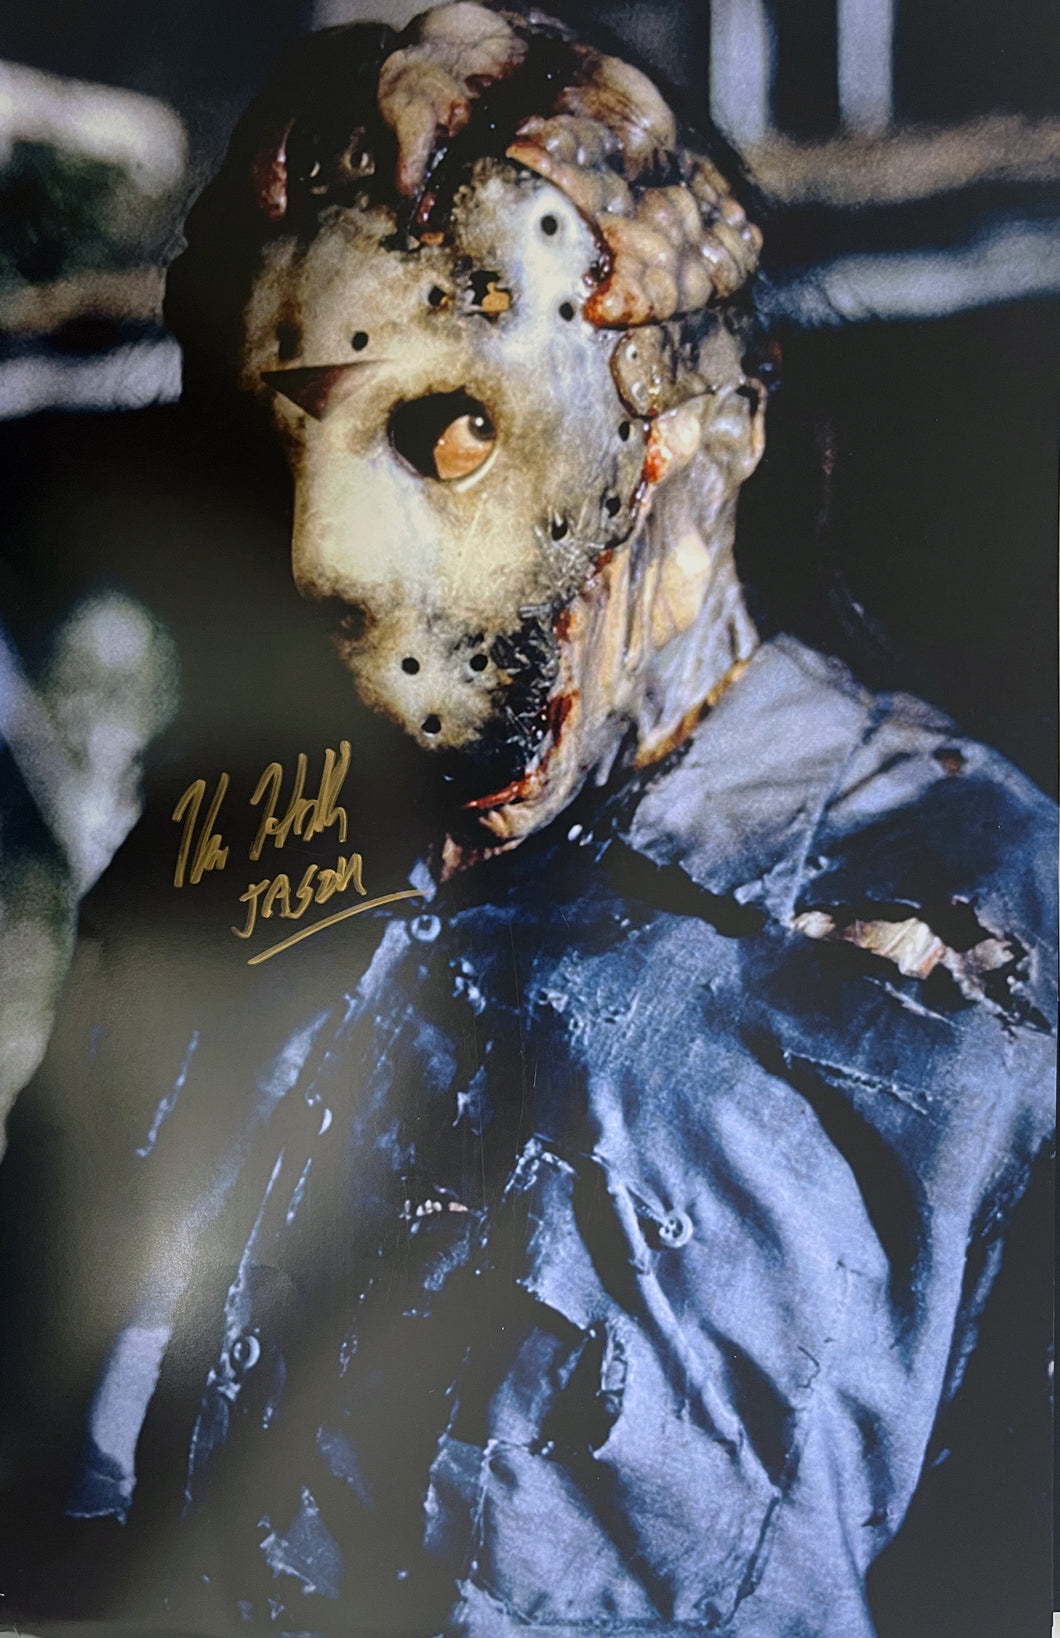 Friday The 13th Kane Hodder signed JASON VOORHEES 11x17